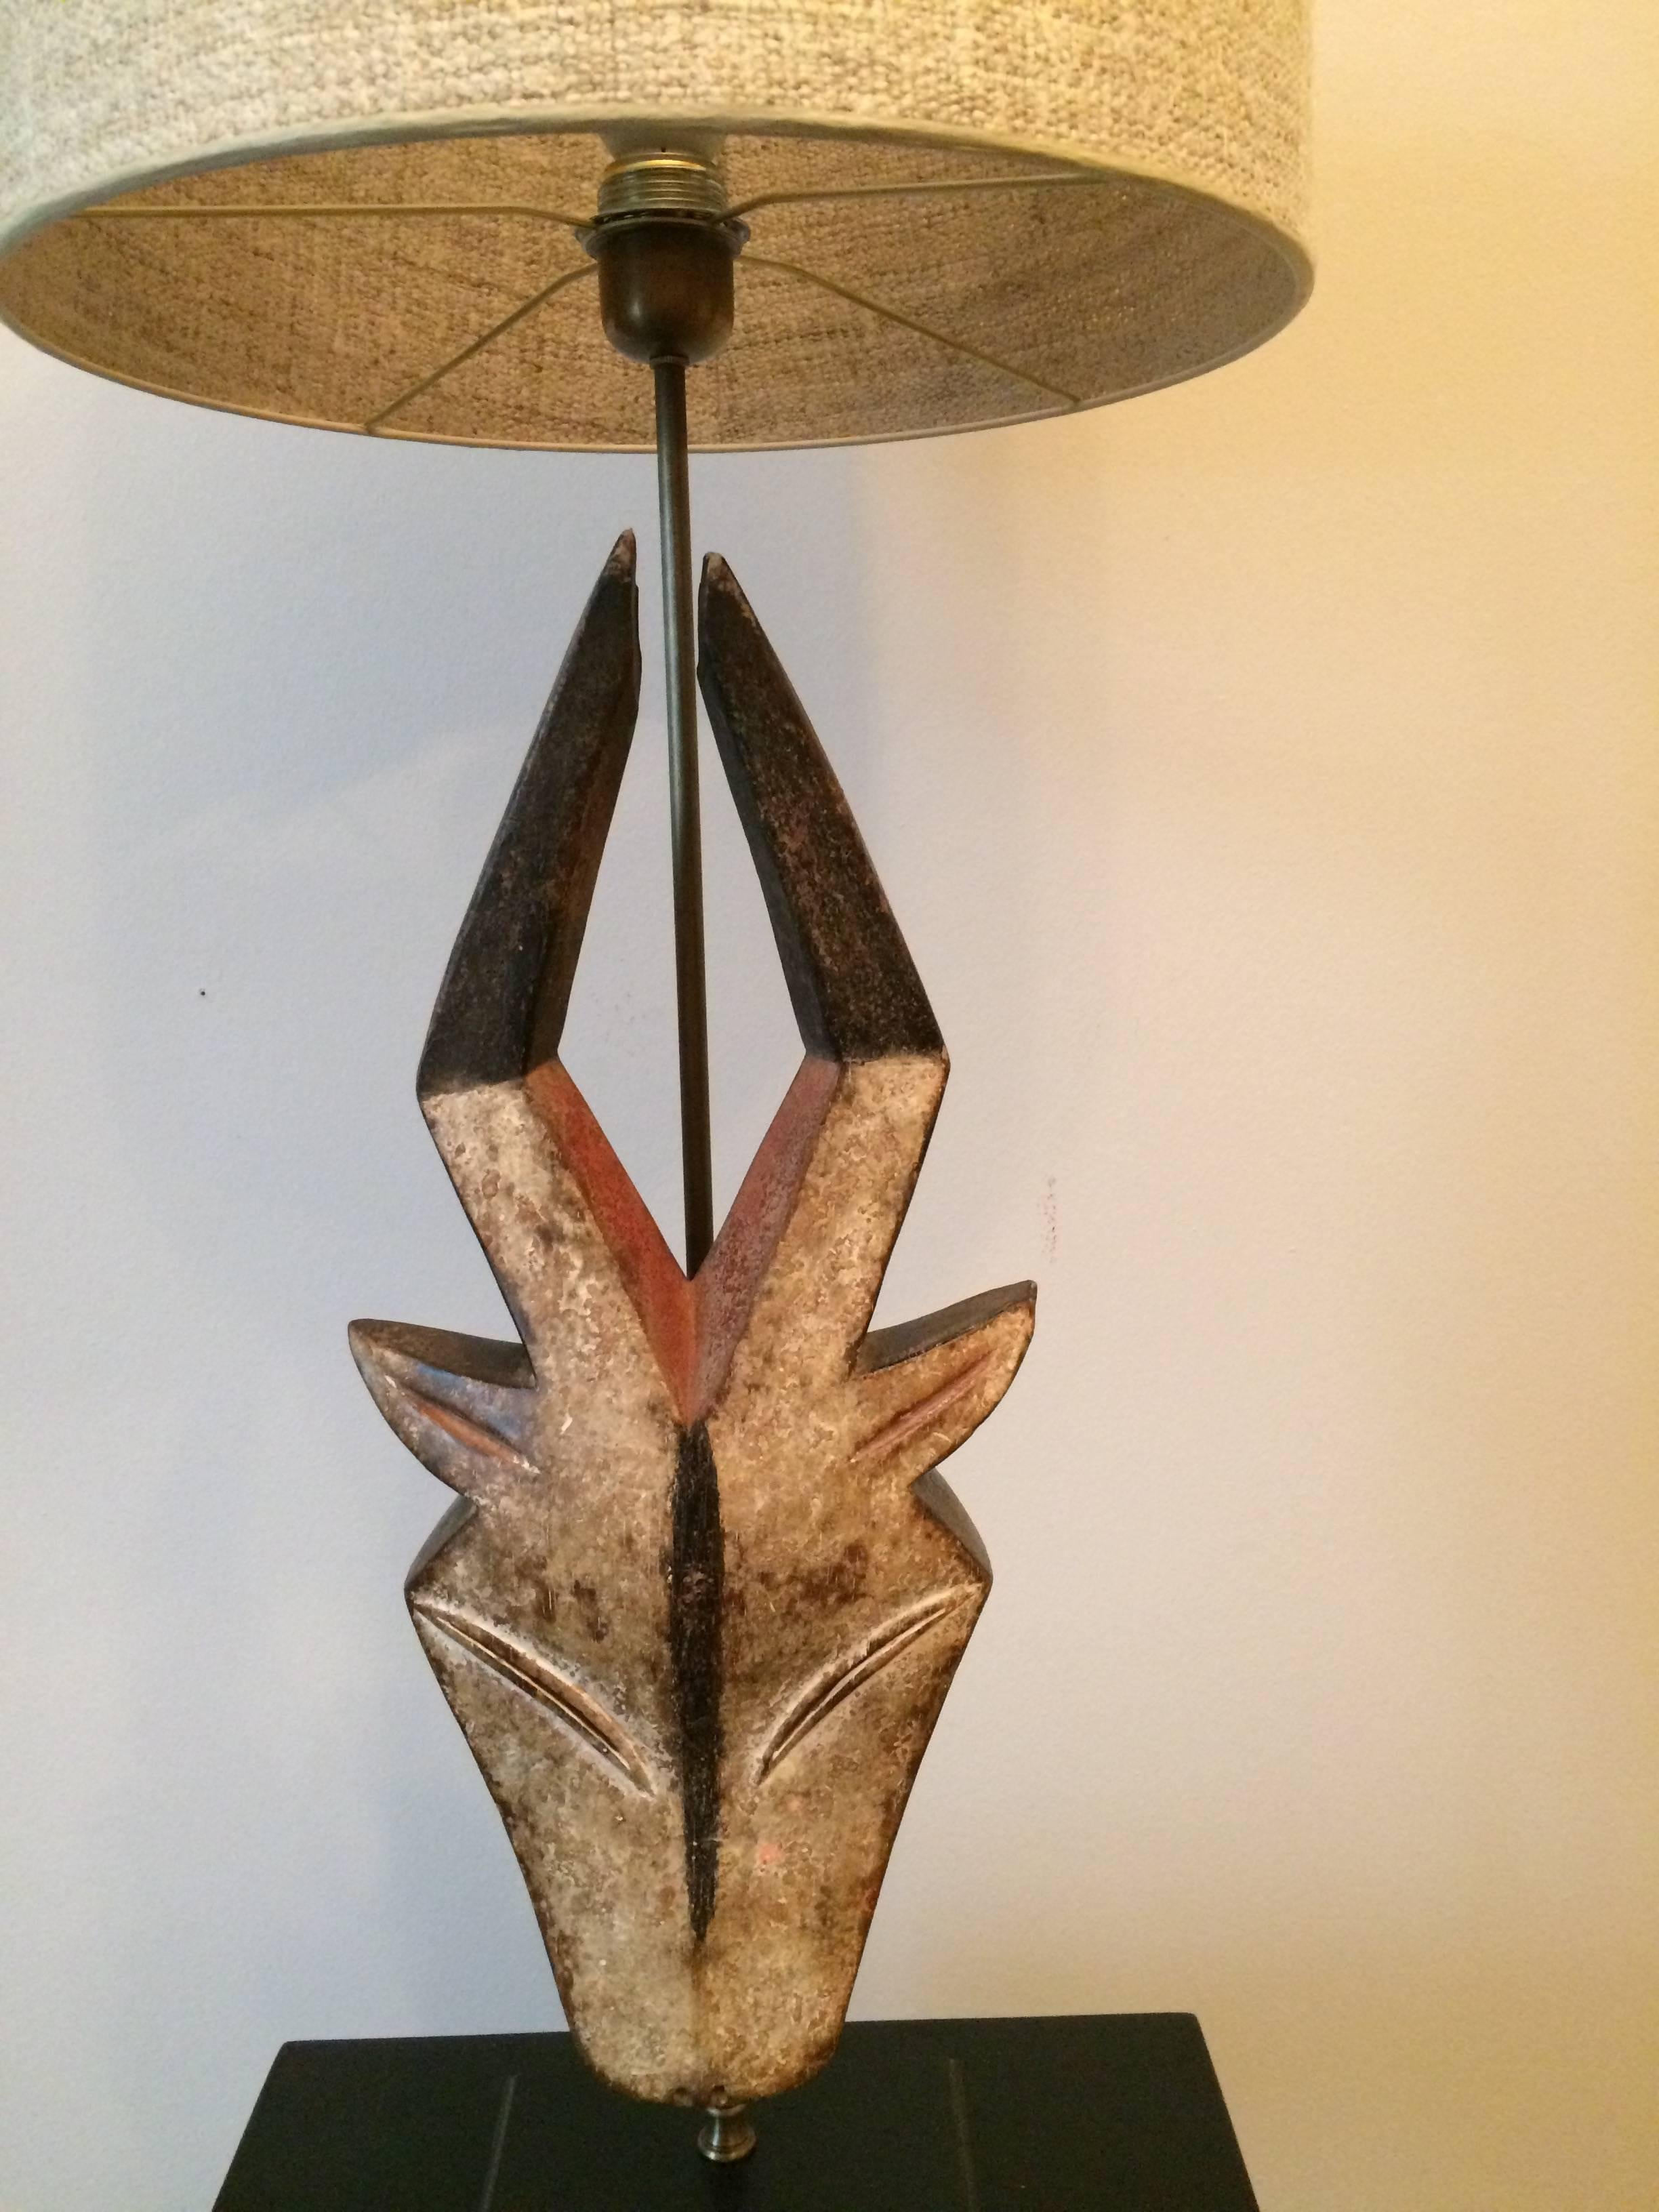 African antilope mask from the tribe Kwele in Gabun.
Mask mounted on a wood base, with tweedy fabric lamp shade
Height of the mask 51 cm.